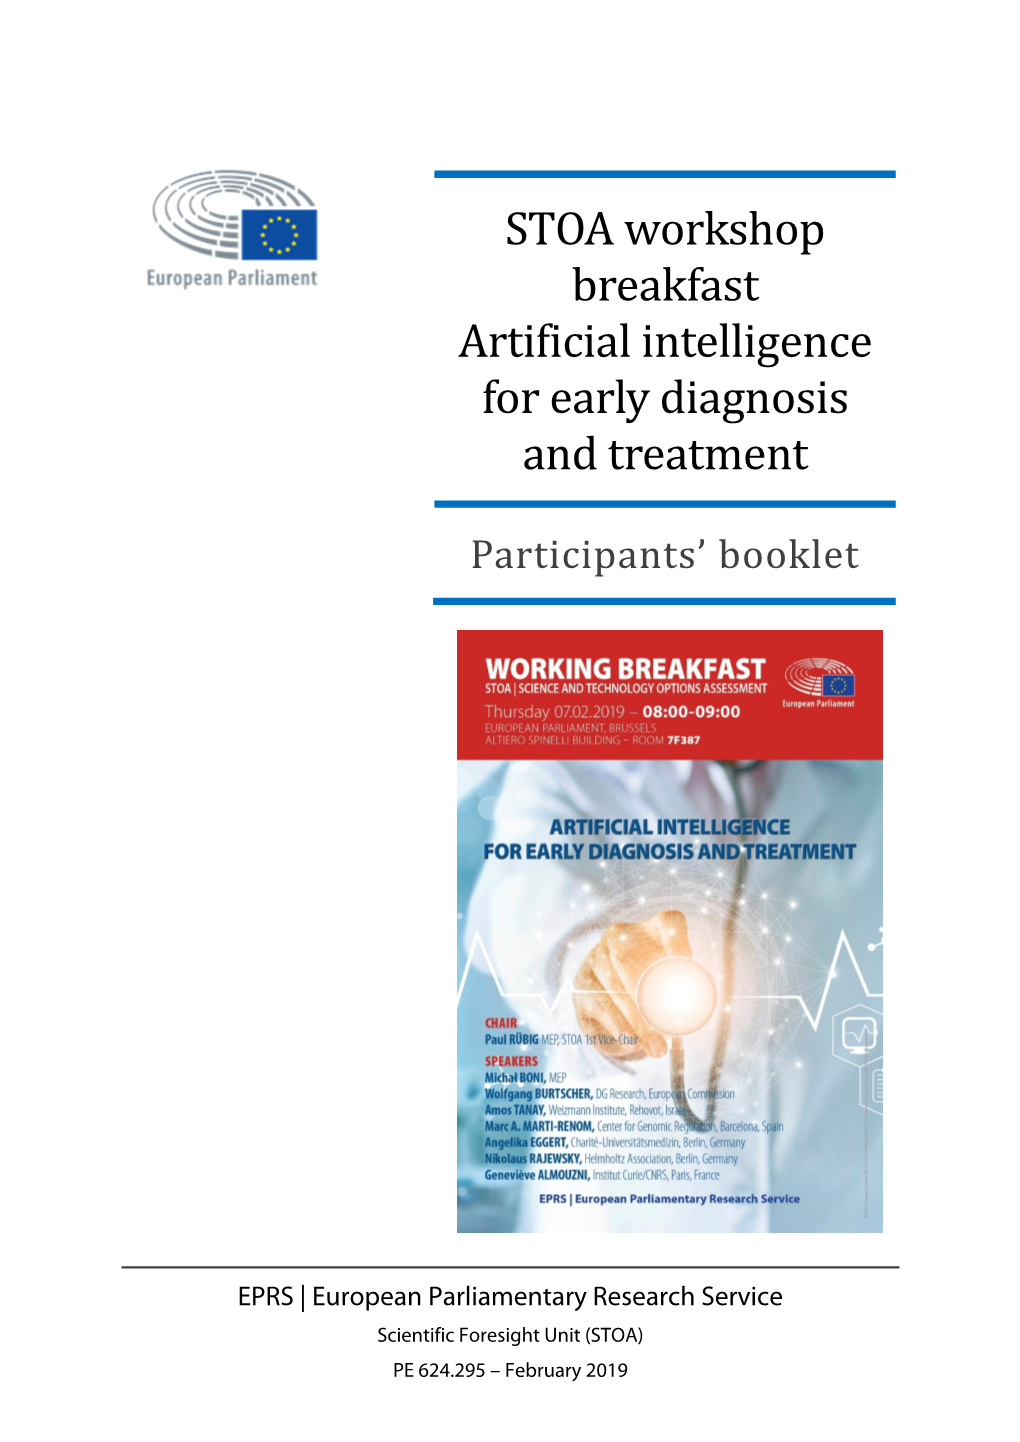 STOA Workshop Breakfast Artificial Intelligence for Early Diagnosis and Treatment Participants’ Booklet